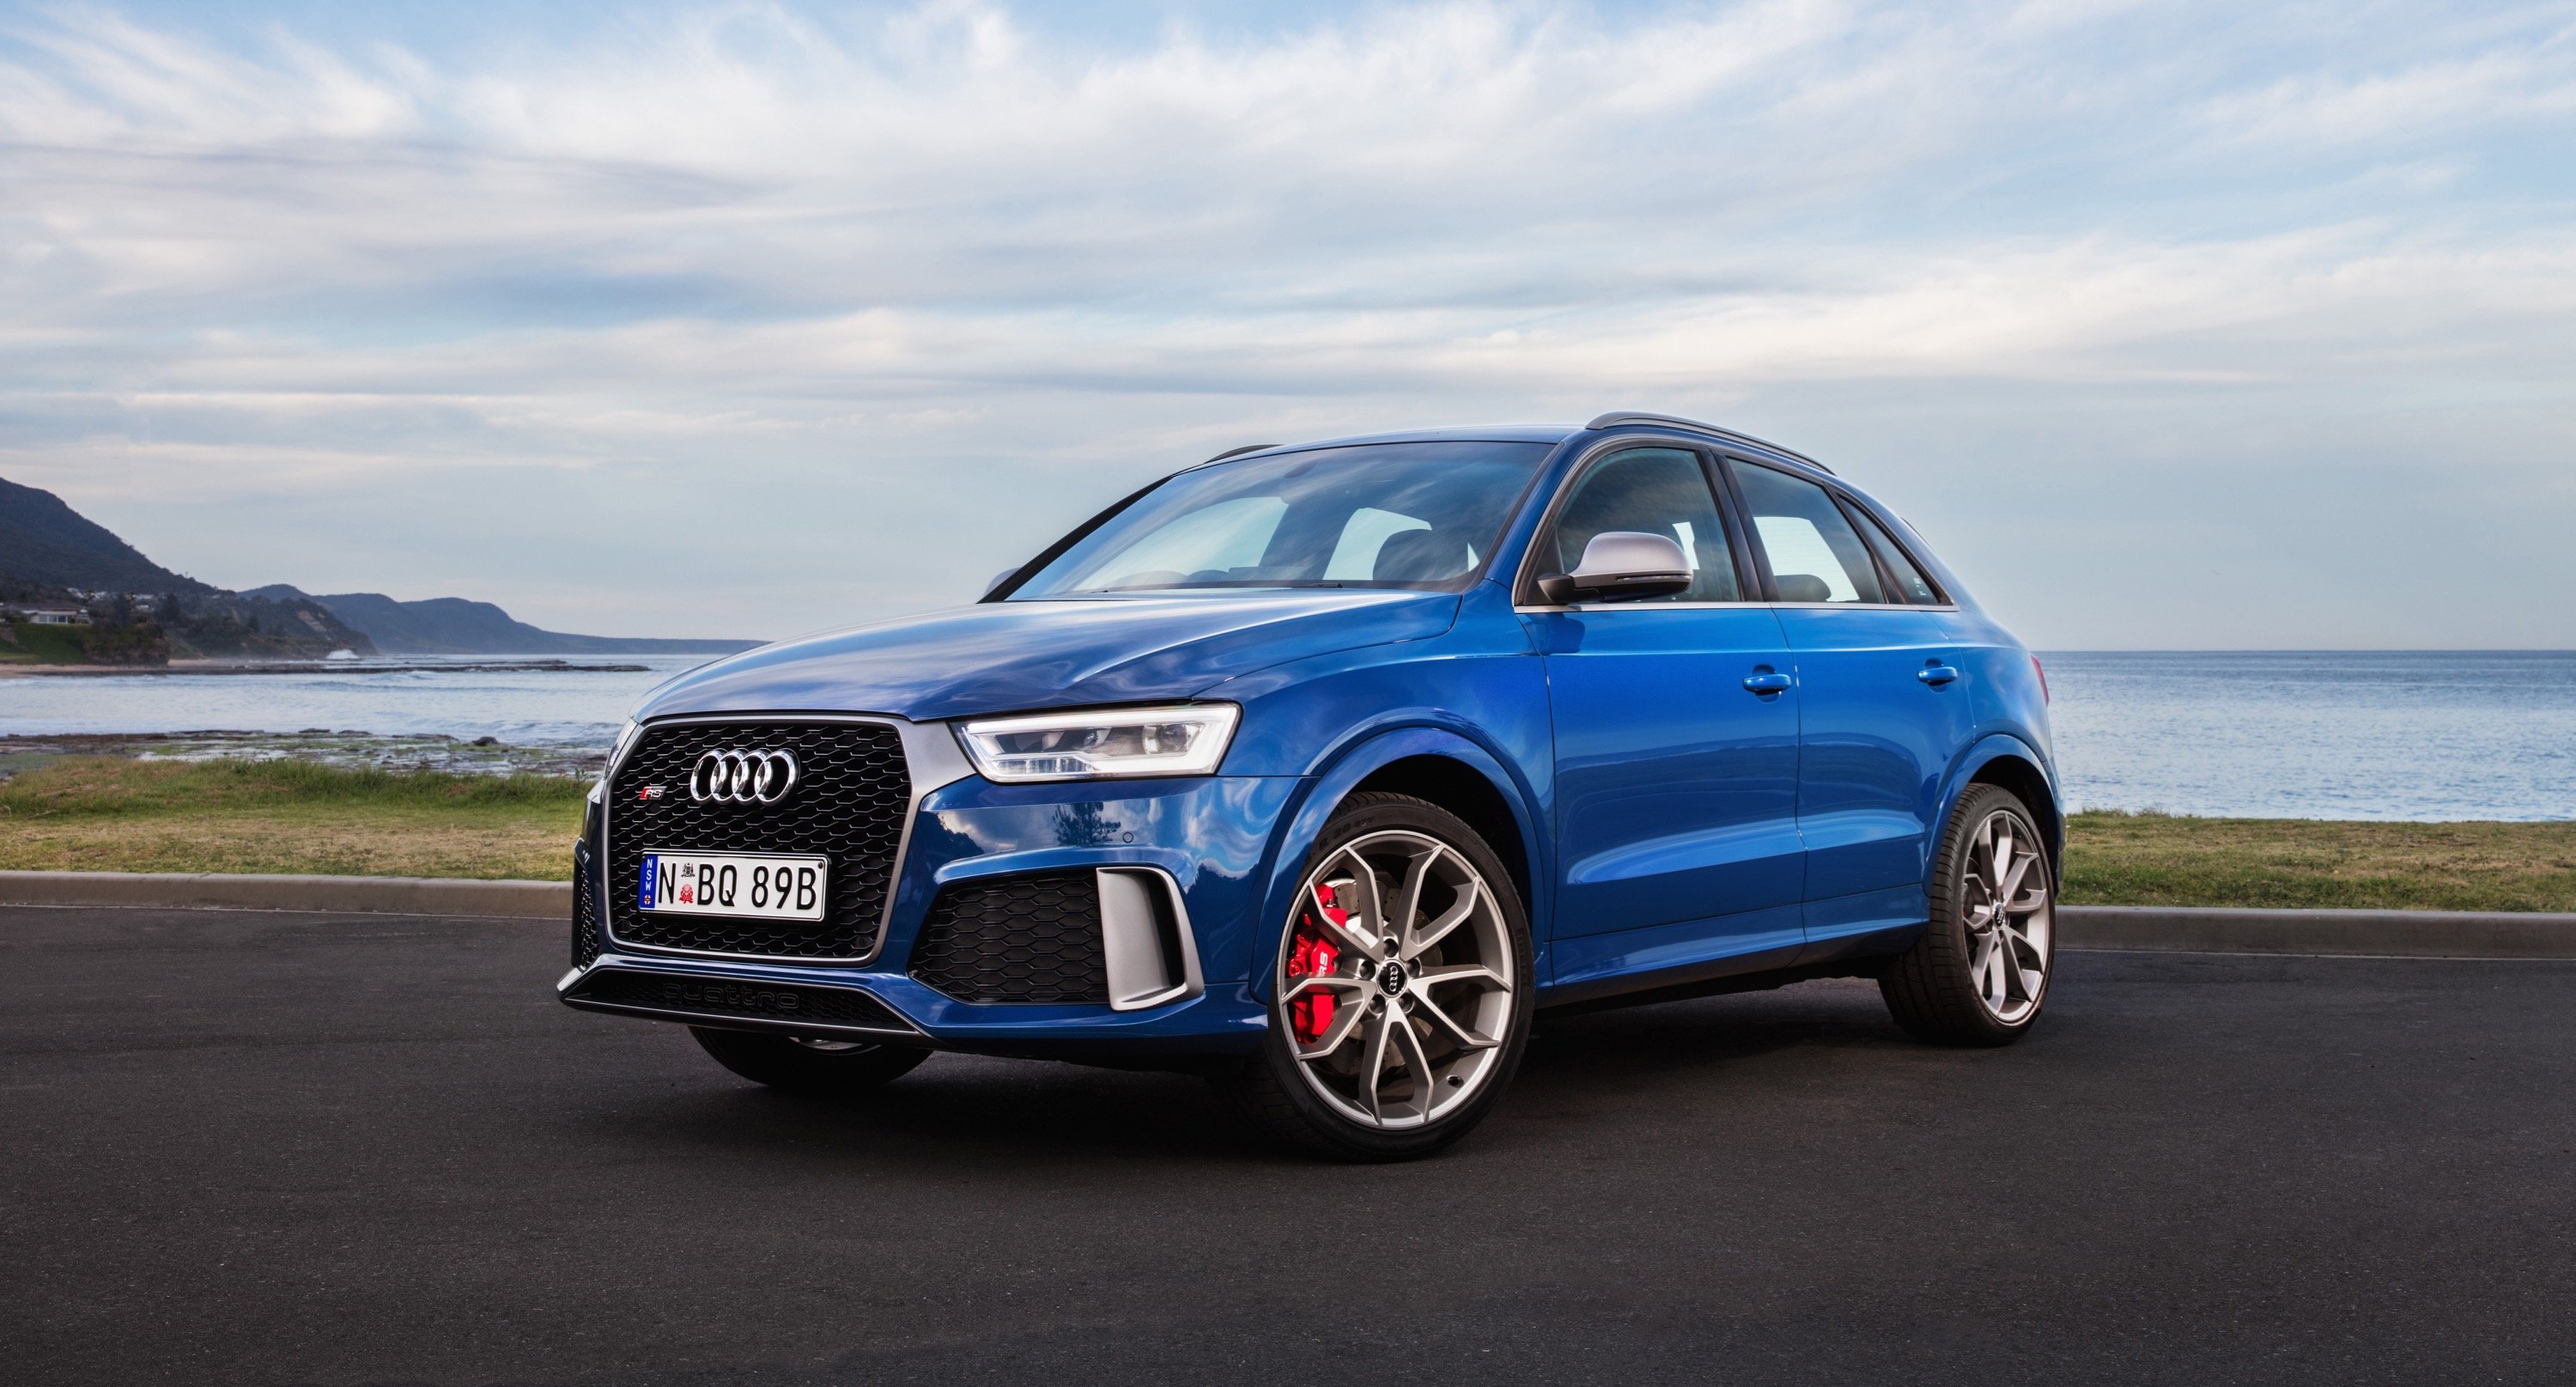 2017 Audi RS Q3 Performance Review | CarAdvice